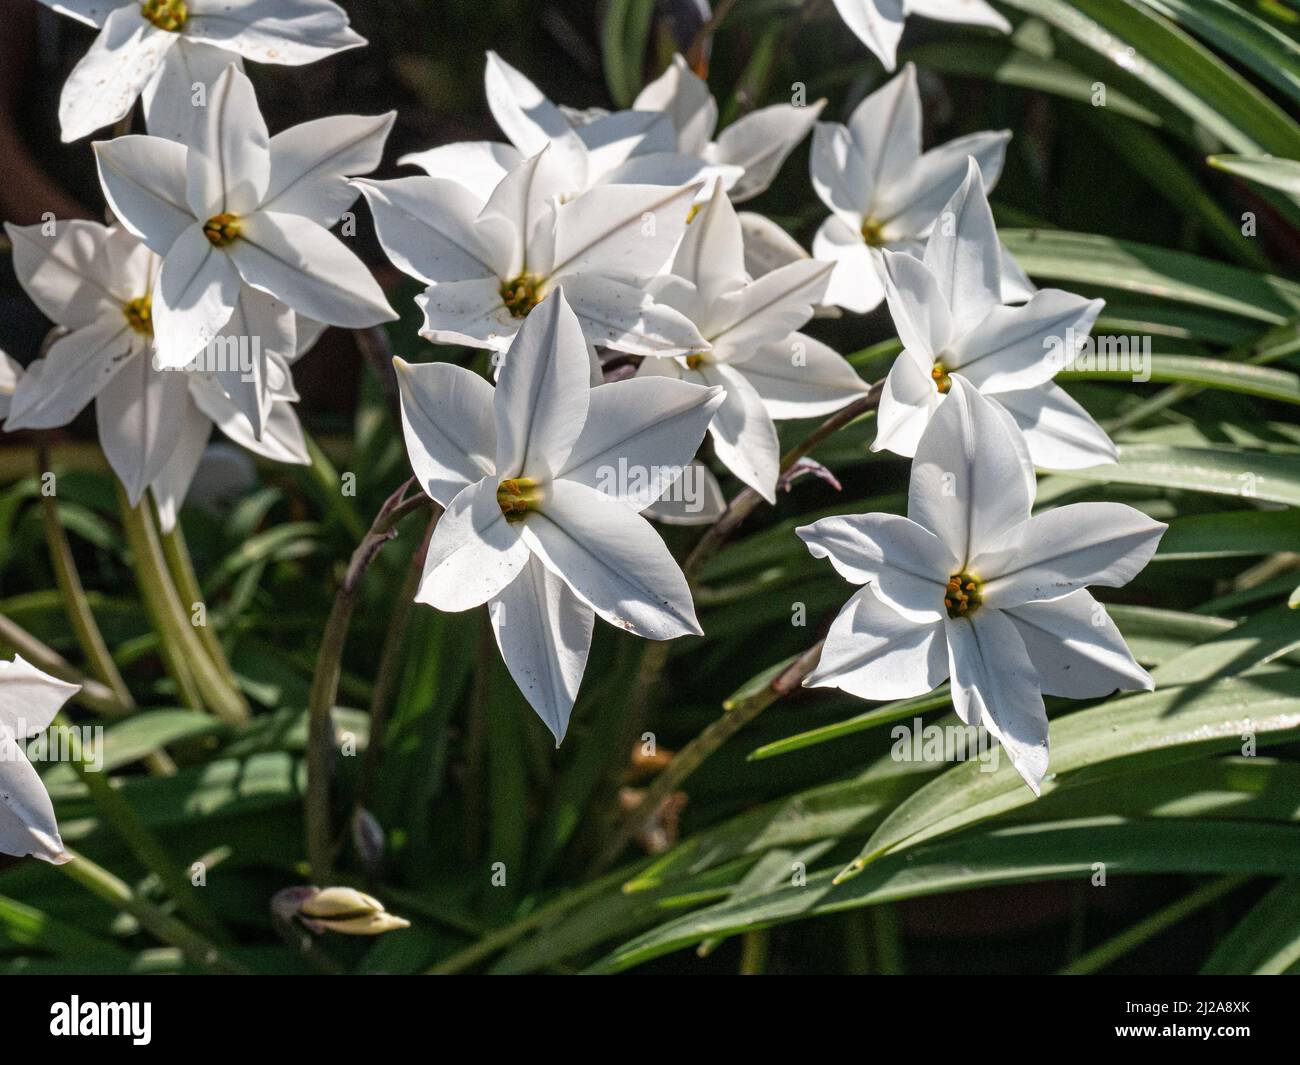 A close up of the clear white star shaped flowers of the early spring bulb Ipheion 'Alberto Castillo' Stock Photo